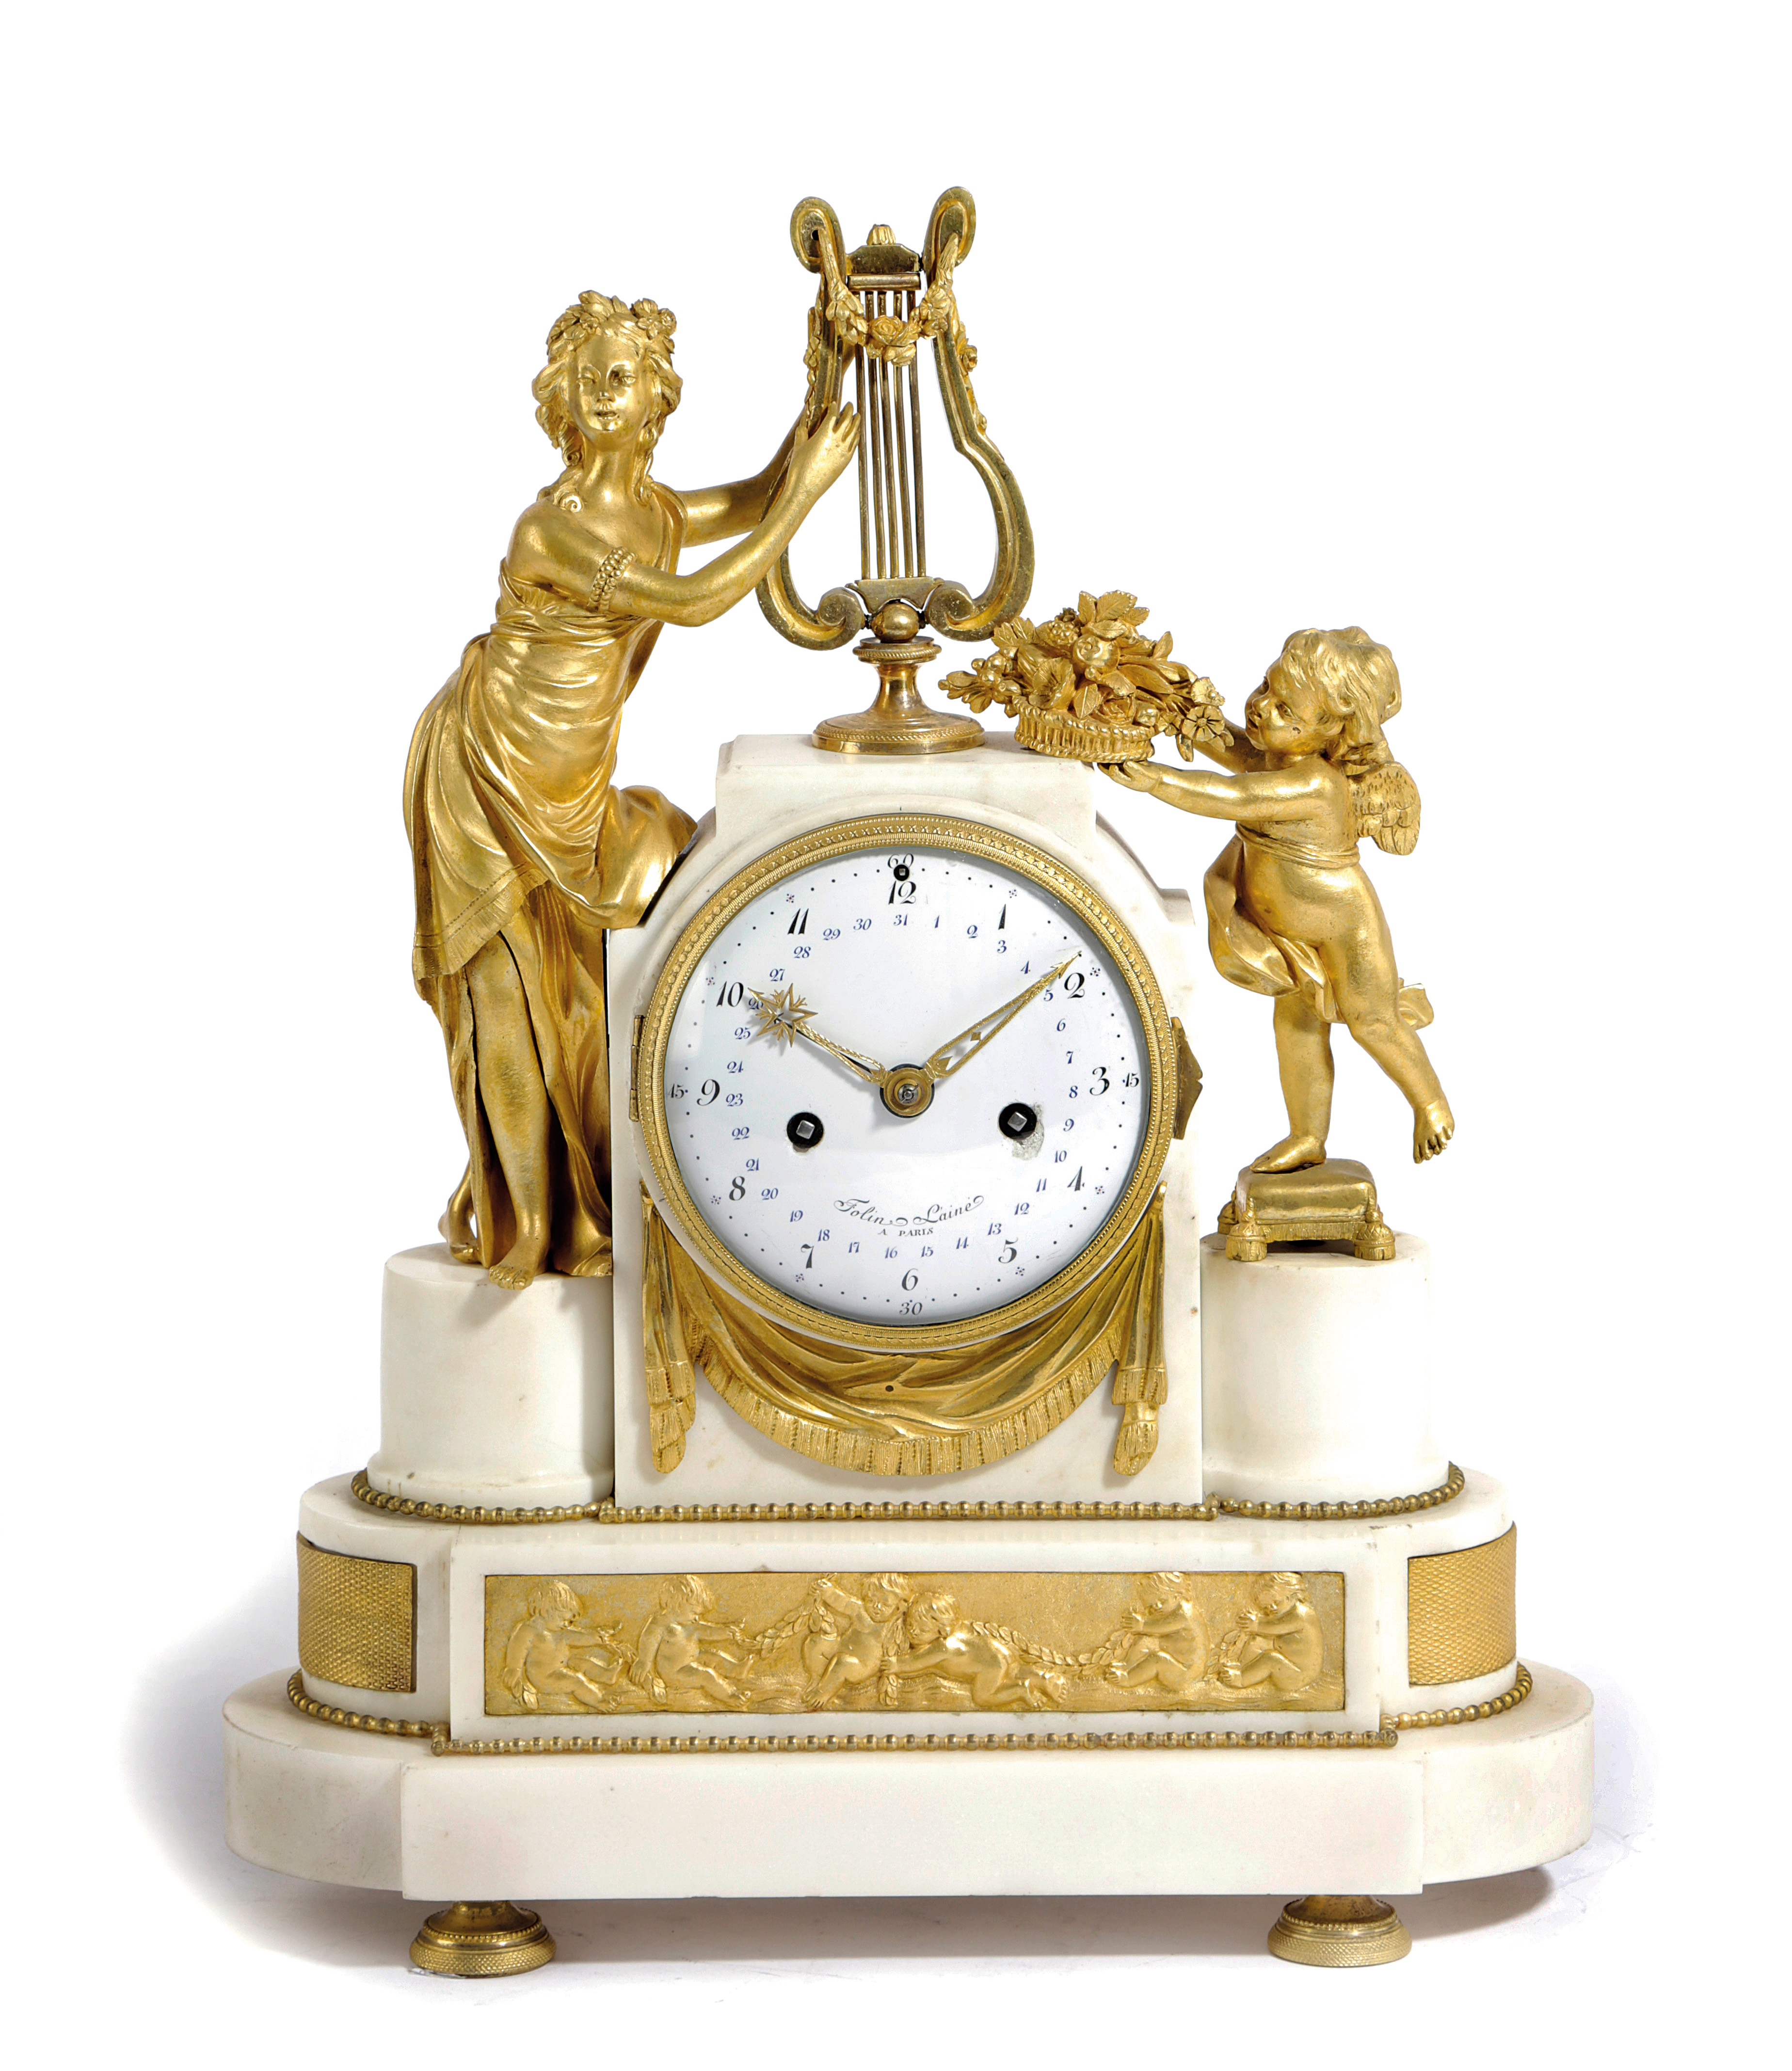 A FRENCH LOUIS XVI WHITE MARBLE AND ORMOLU MANTEL CLOCK BY FOLIN L'AINE A PARIS, LATE 18TH CENTURY